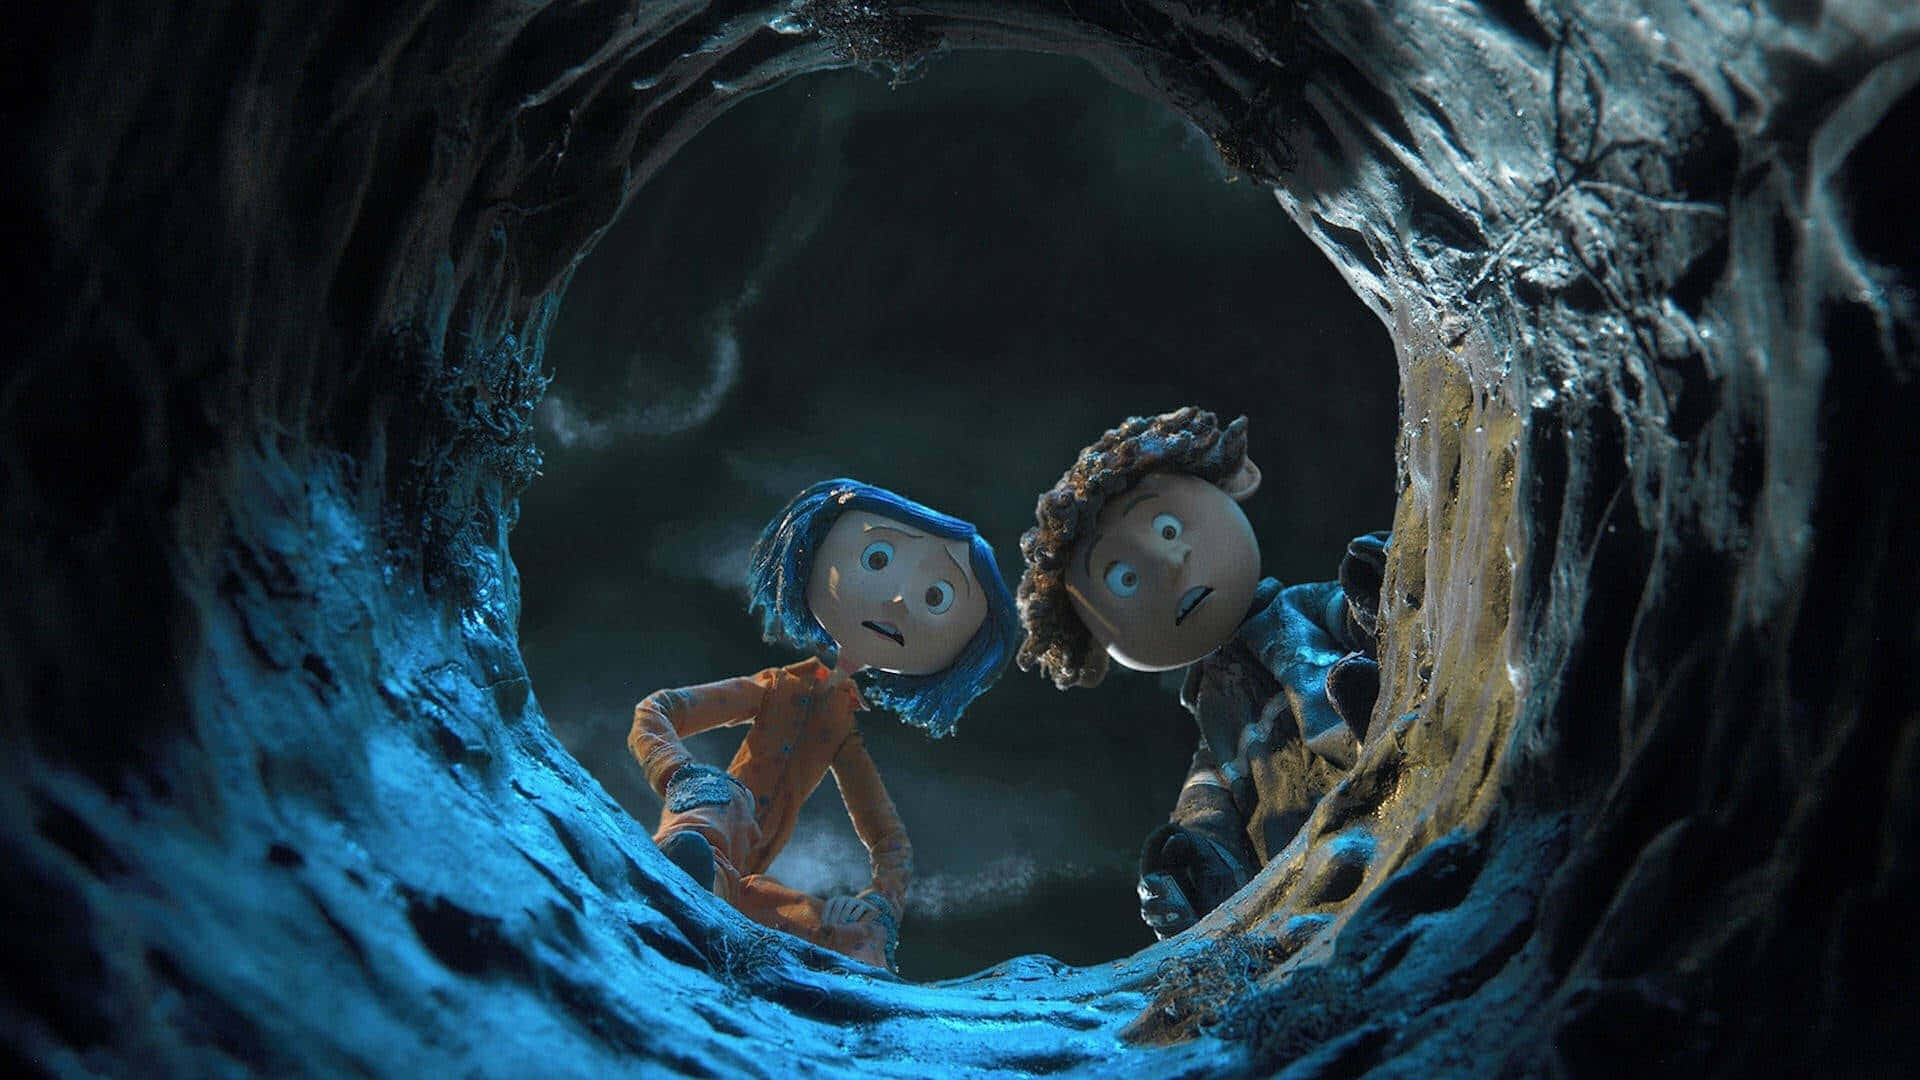 The mysterious door leading into a fantasy world in Coraline